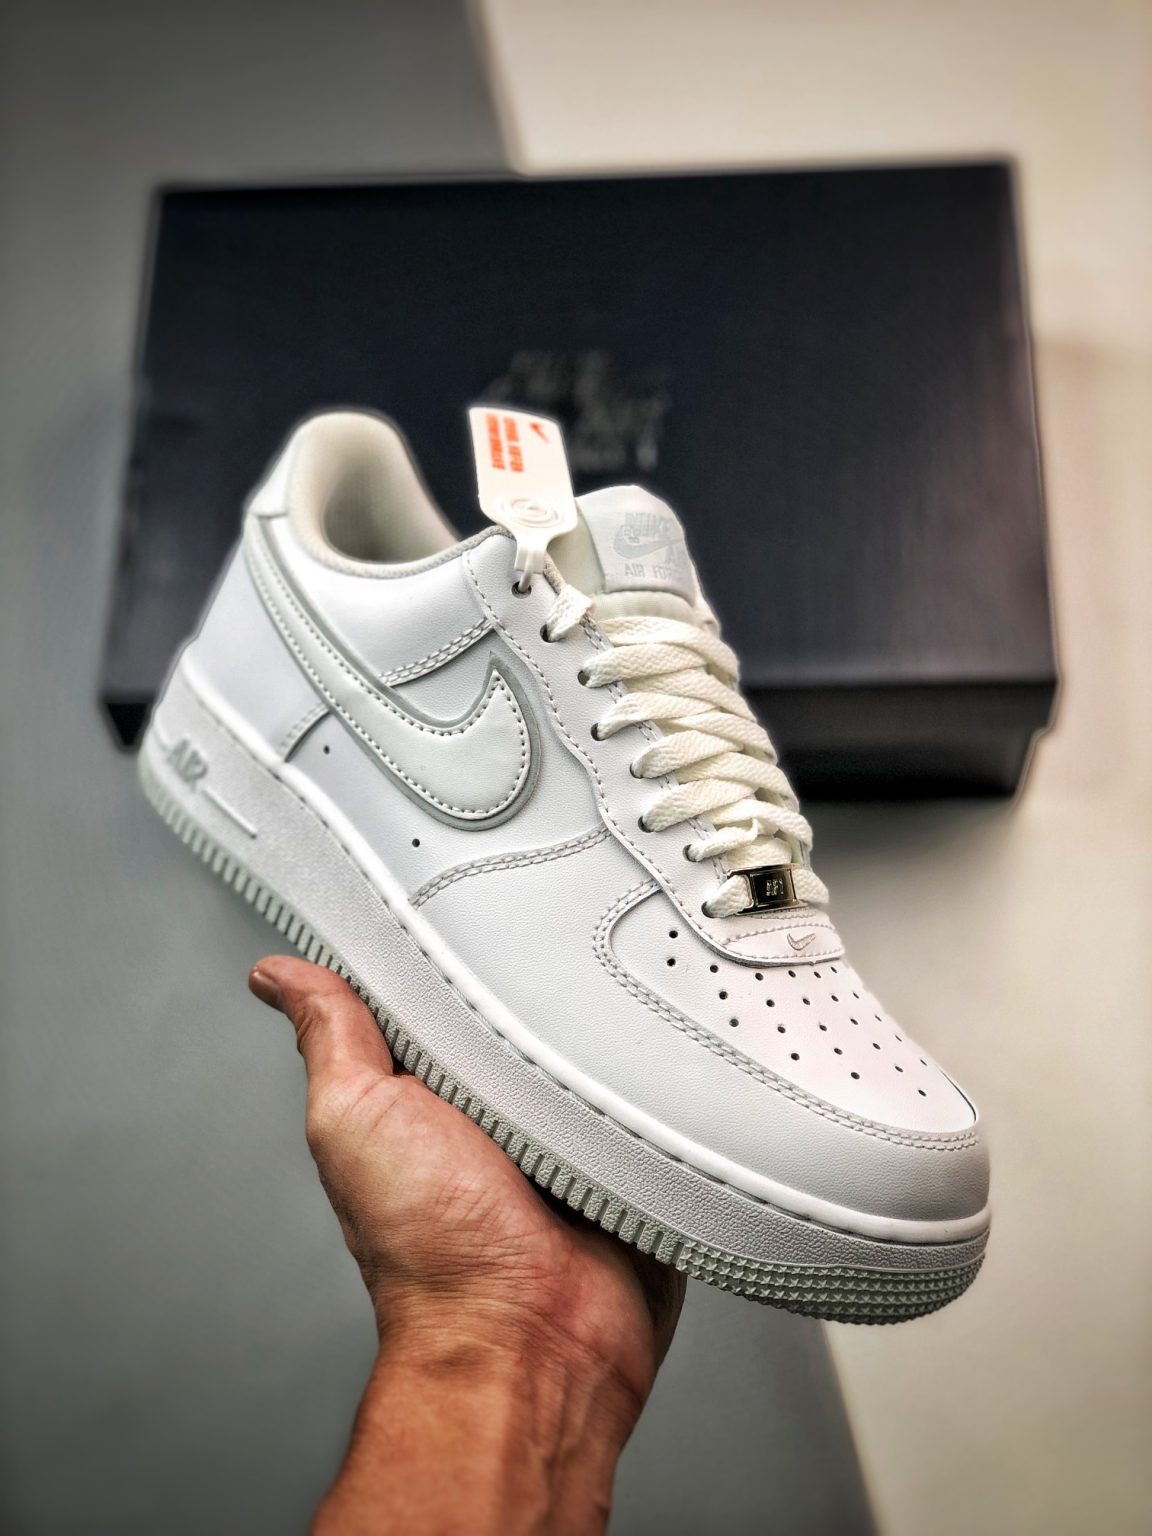 Nike Air Force 1 Low “White/Grey” DV0788-100 For Sale – Sneaker Hello